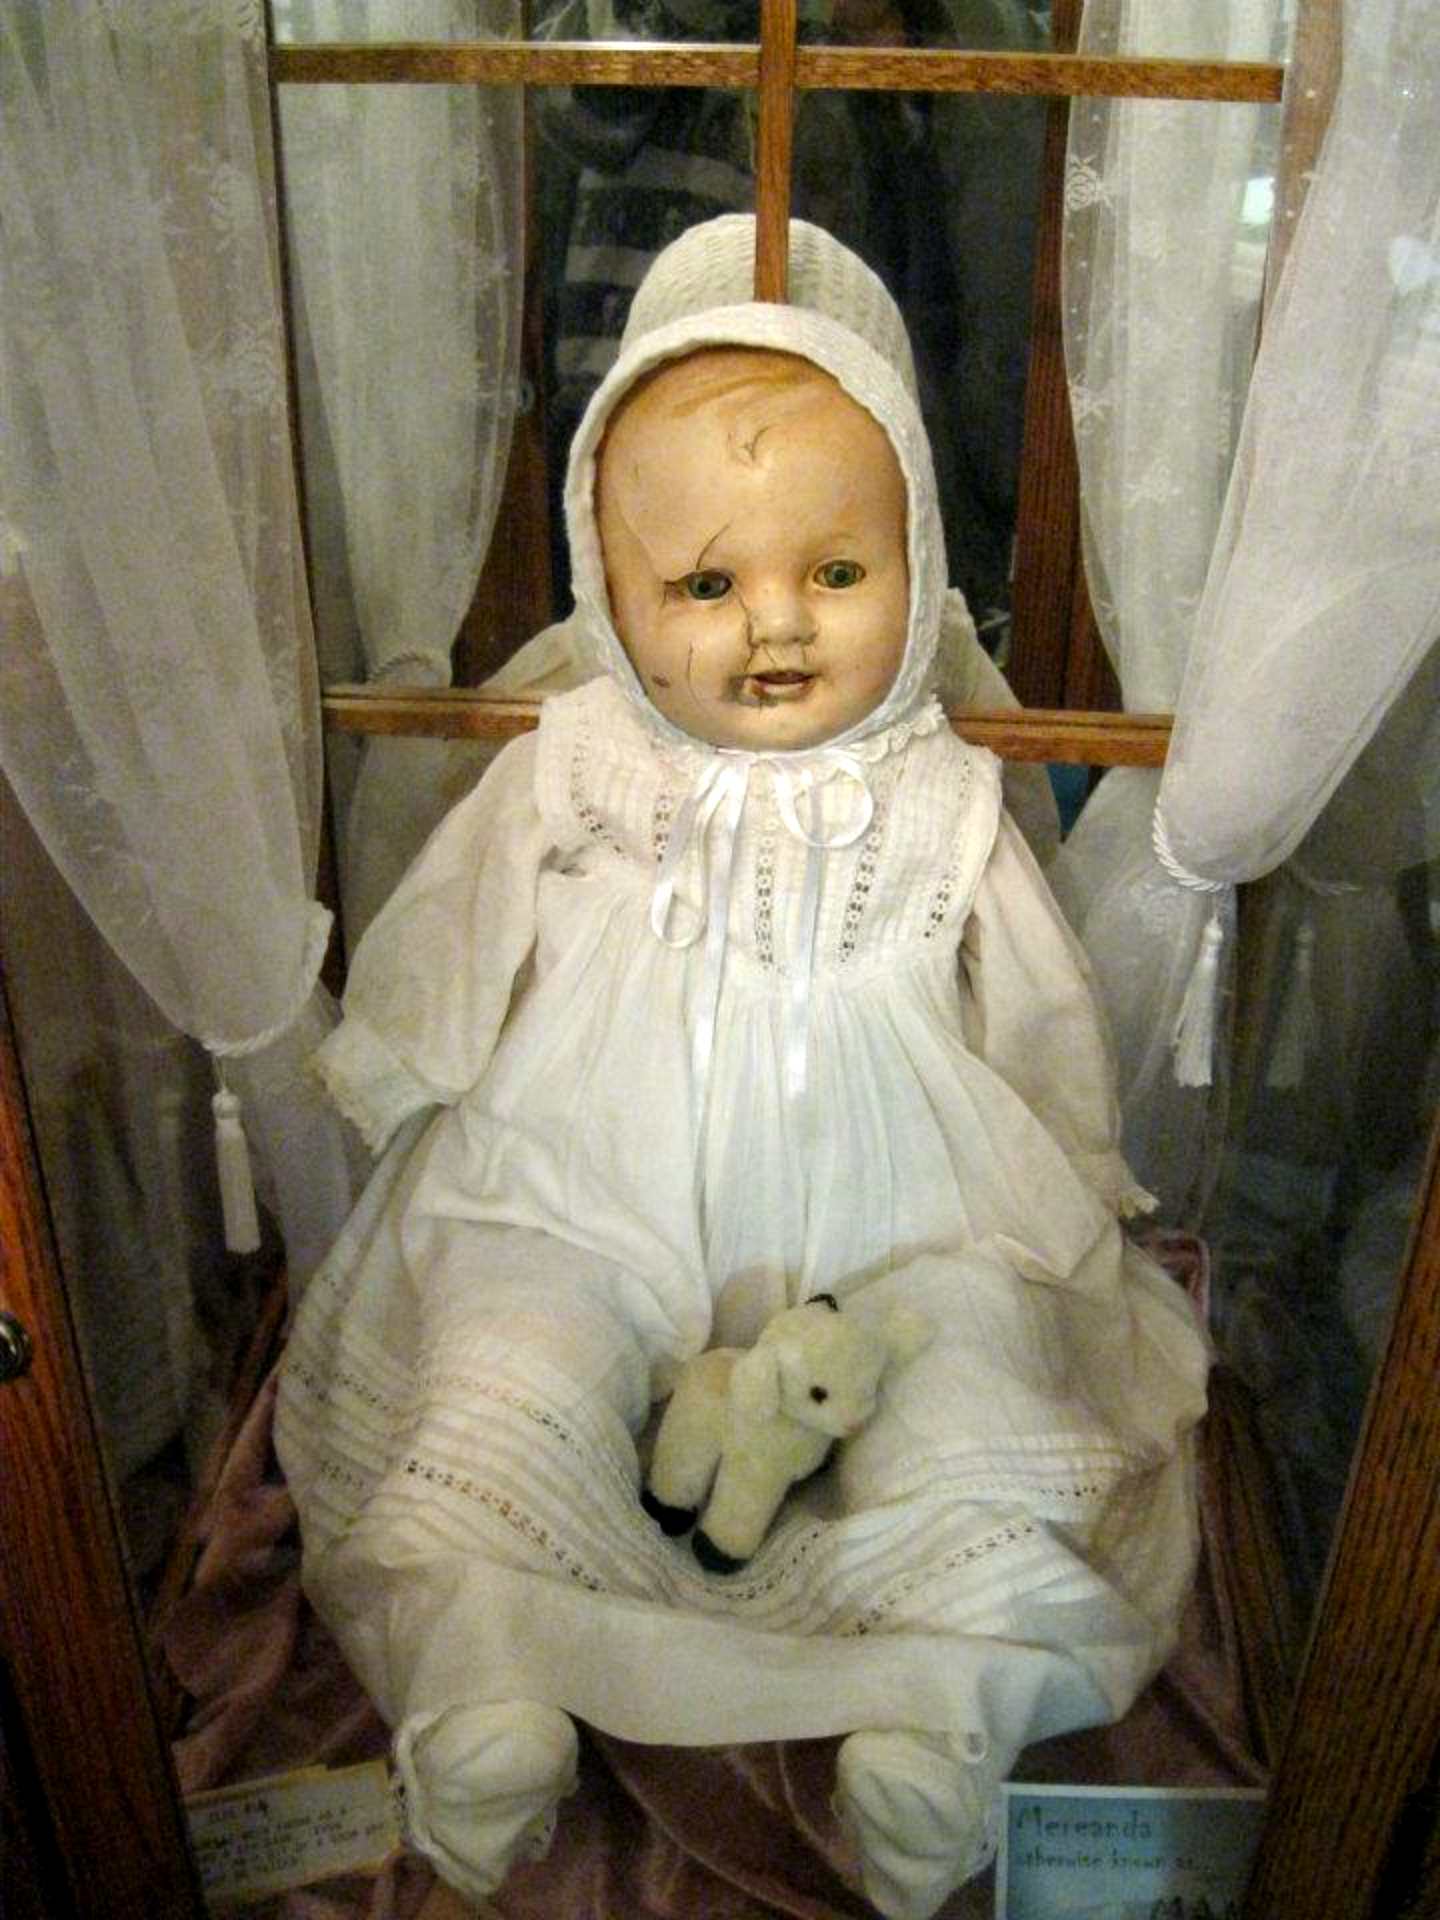 Mandy the Doll, Anglicko